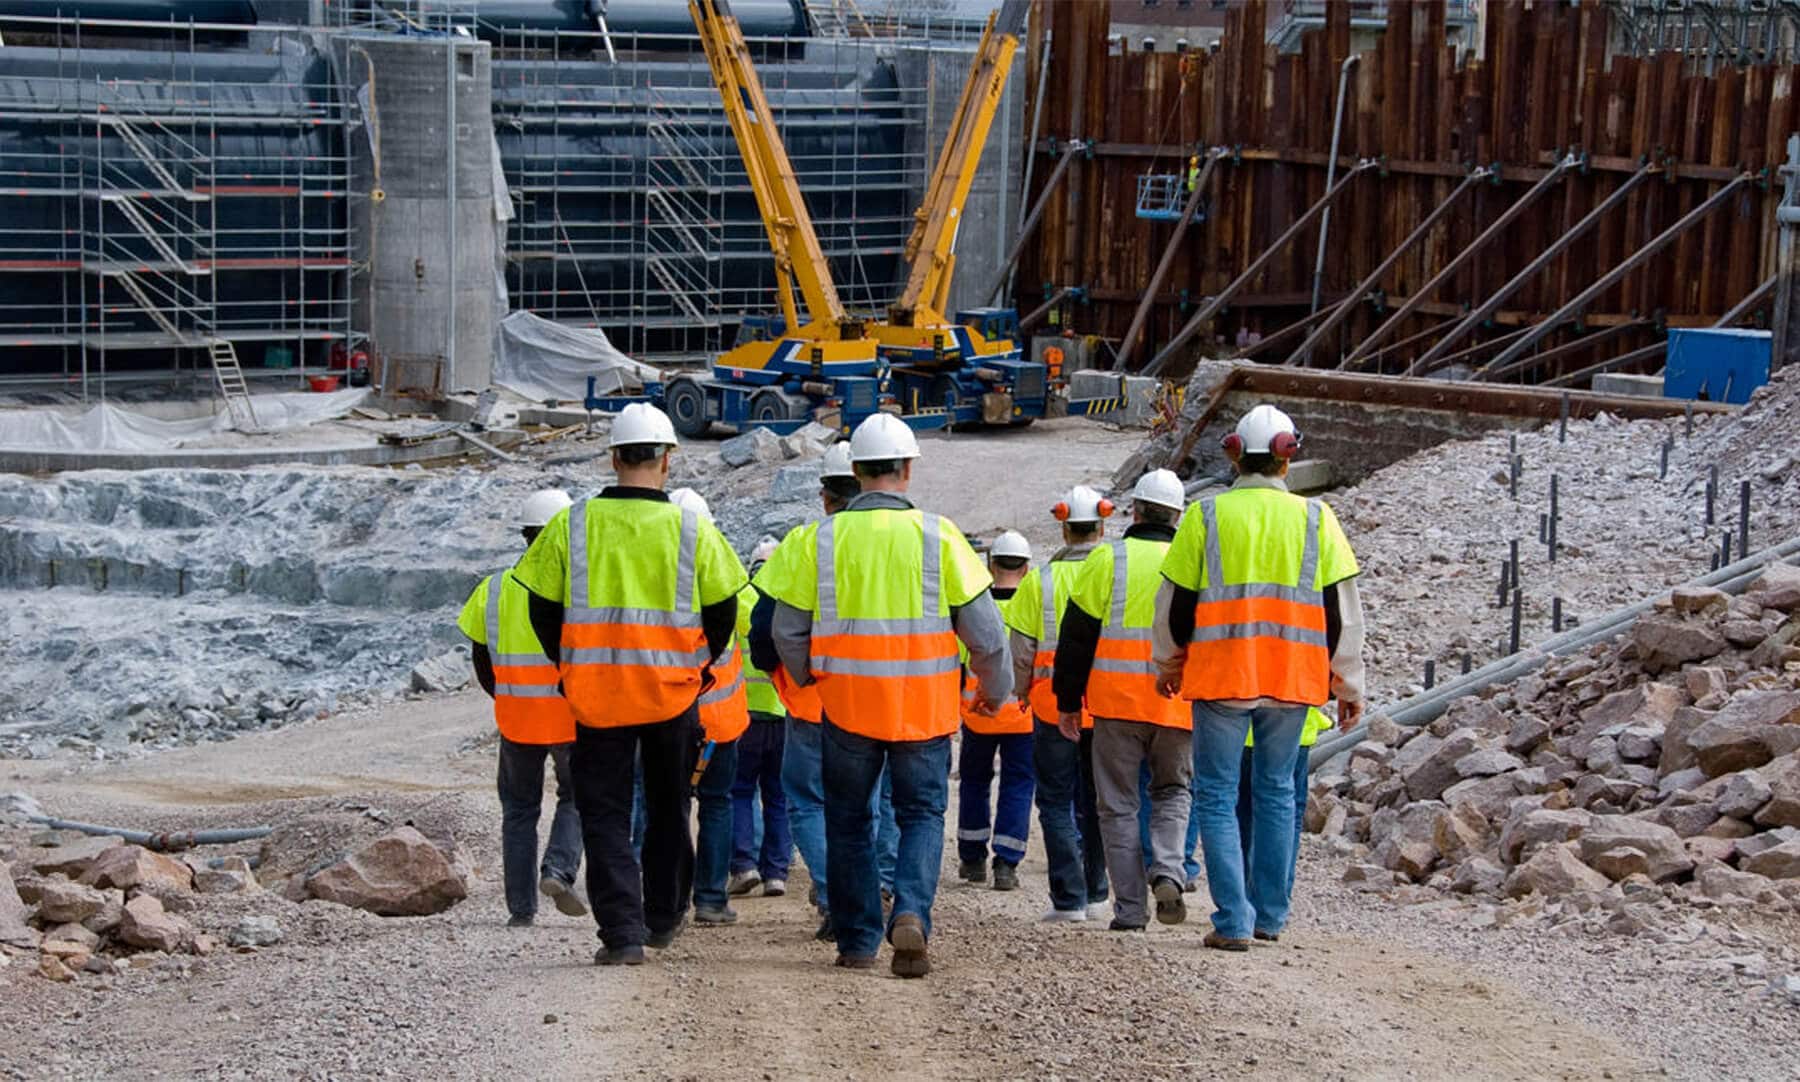 Rear shot of a group of construction workers on a job site. They are walking down a gravel hill towards machinery and a construction project.